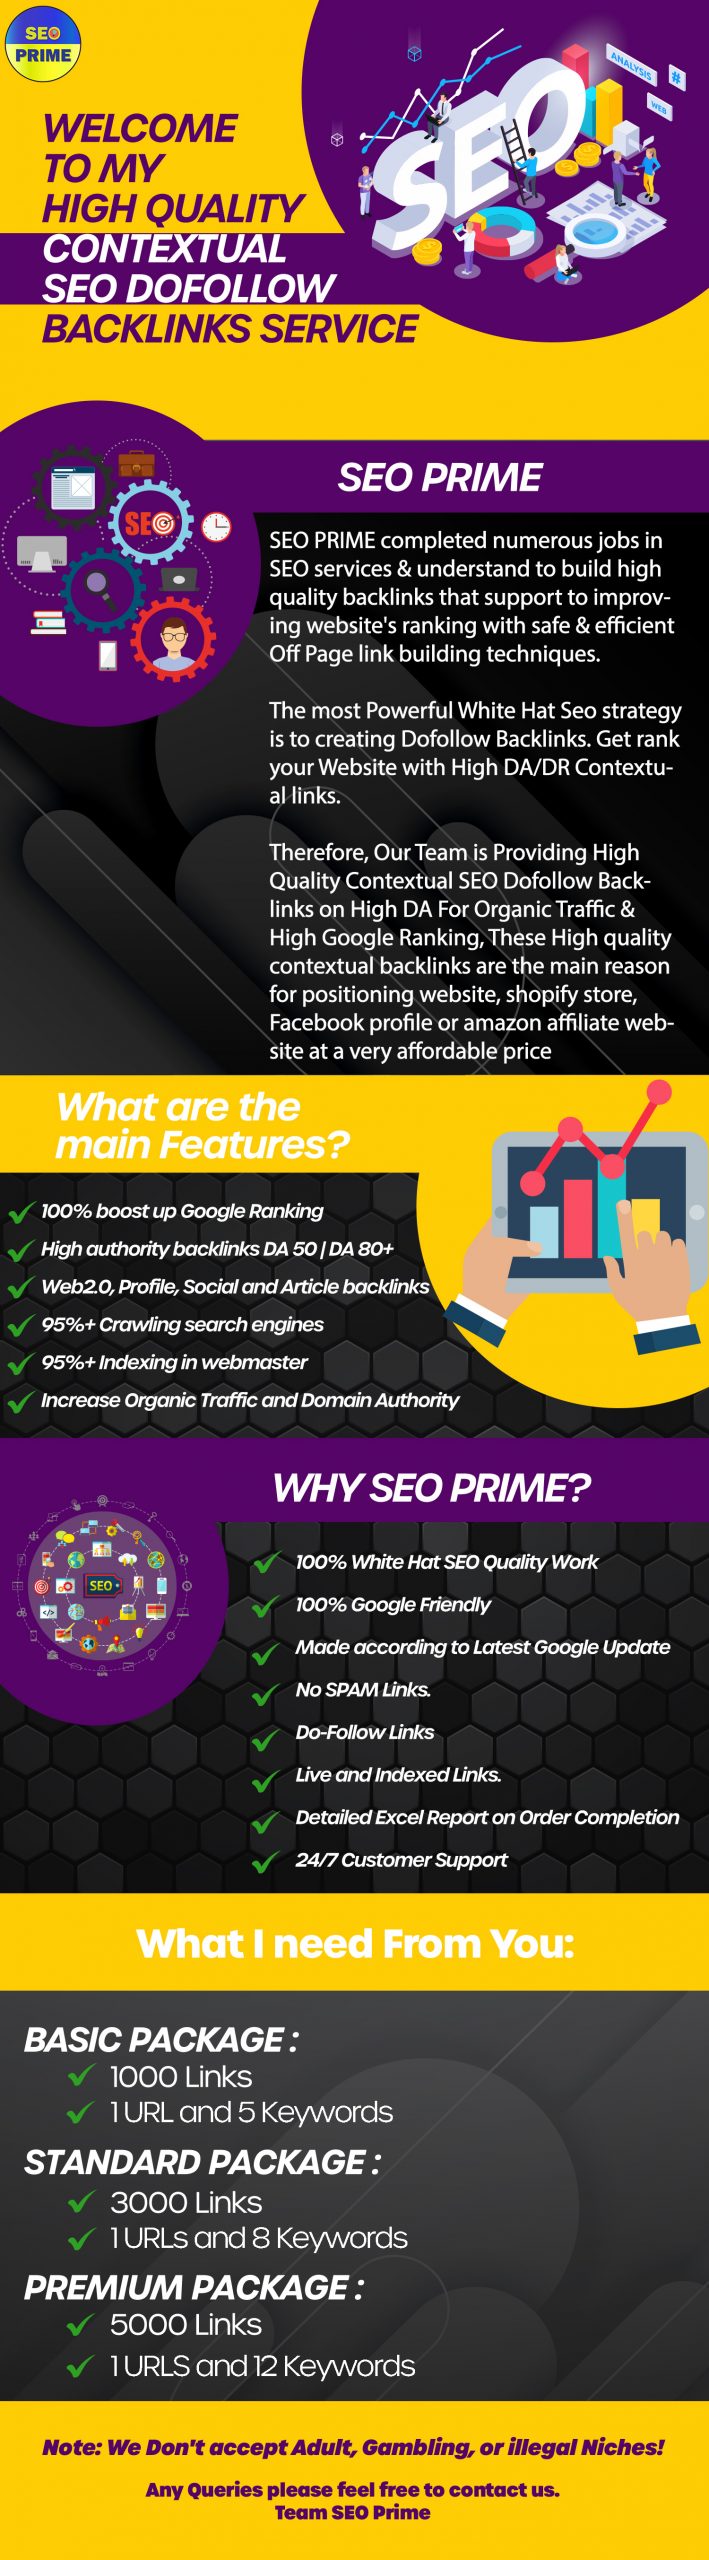 I will create 1000 High Quality SEO Contextual Backlinks for $29